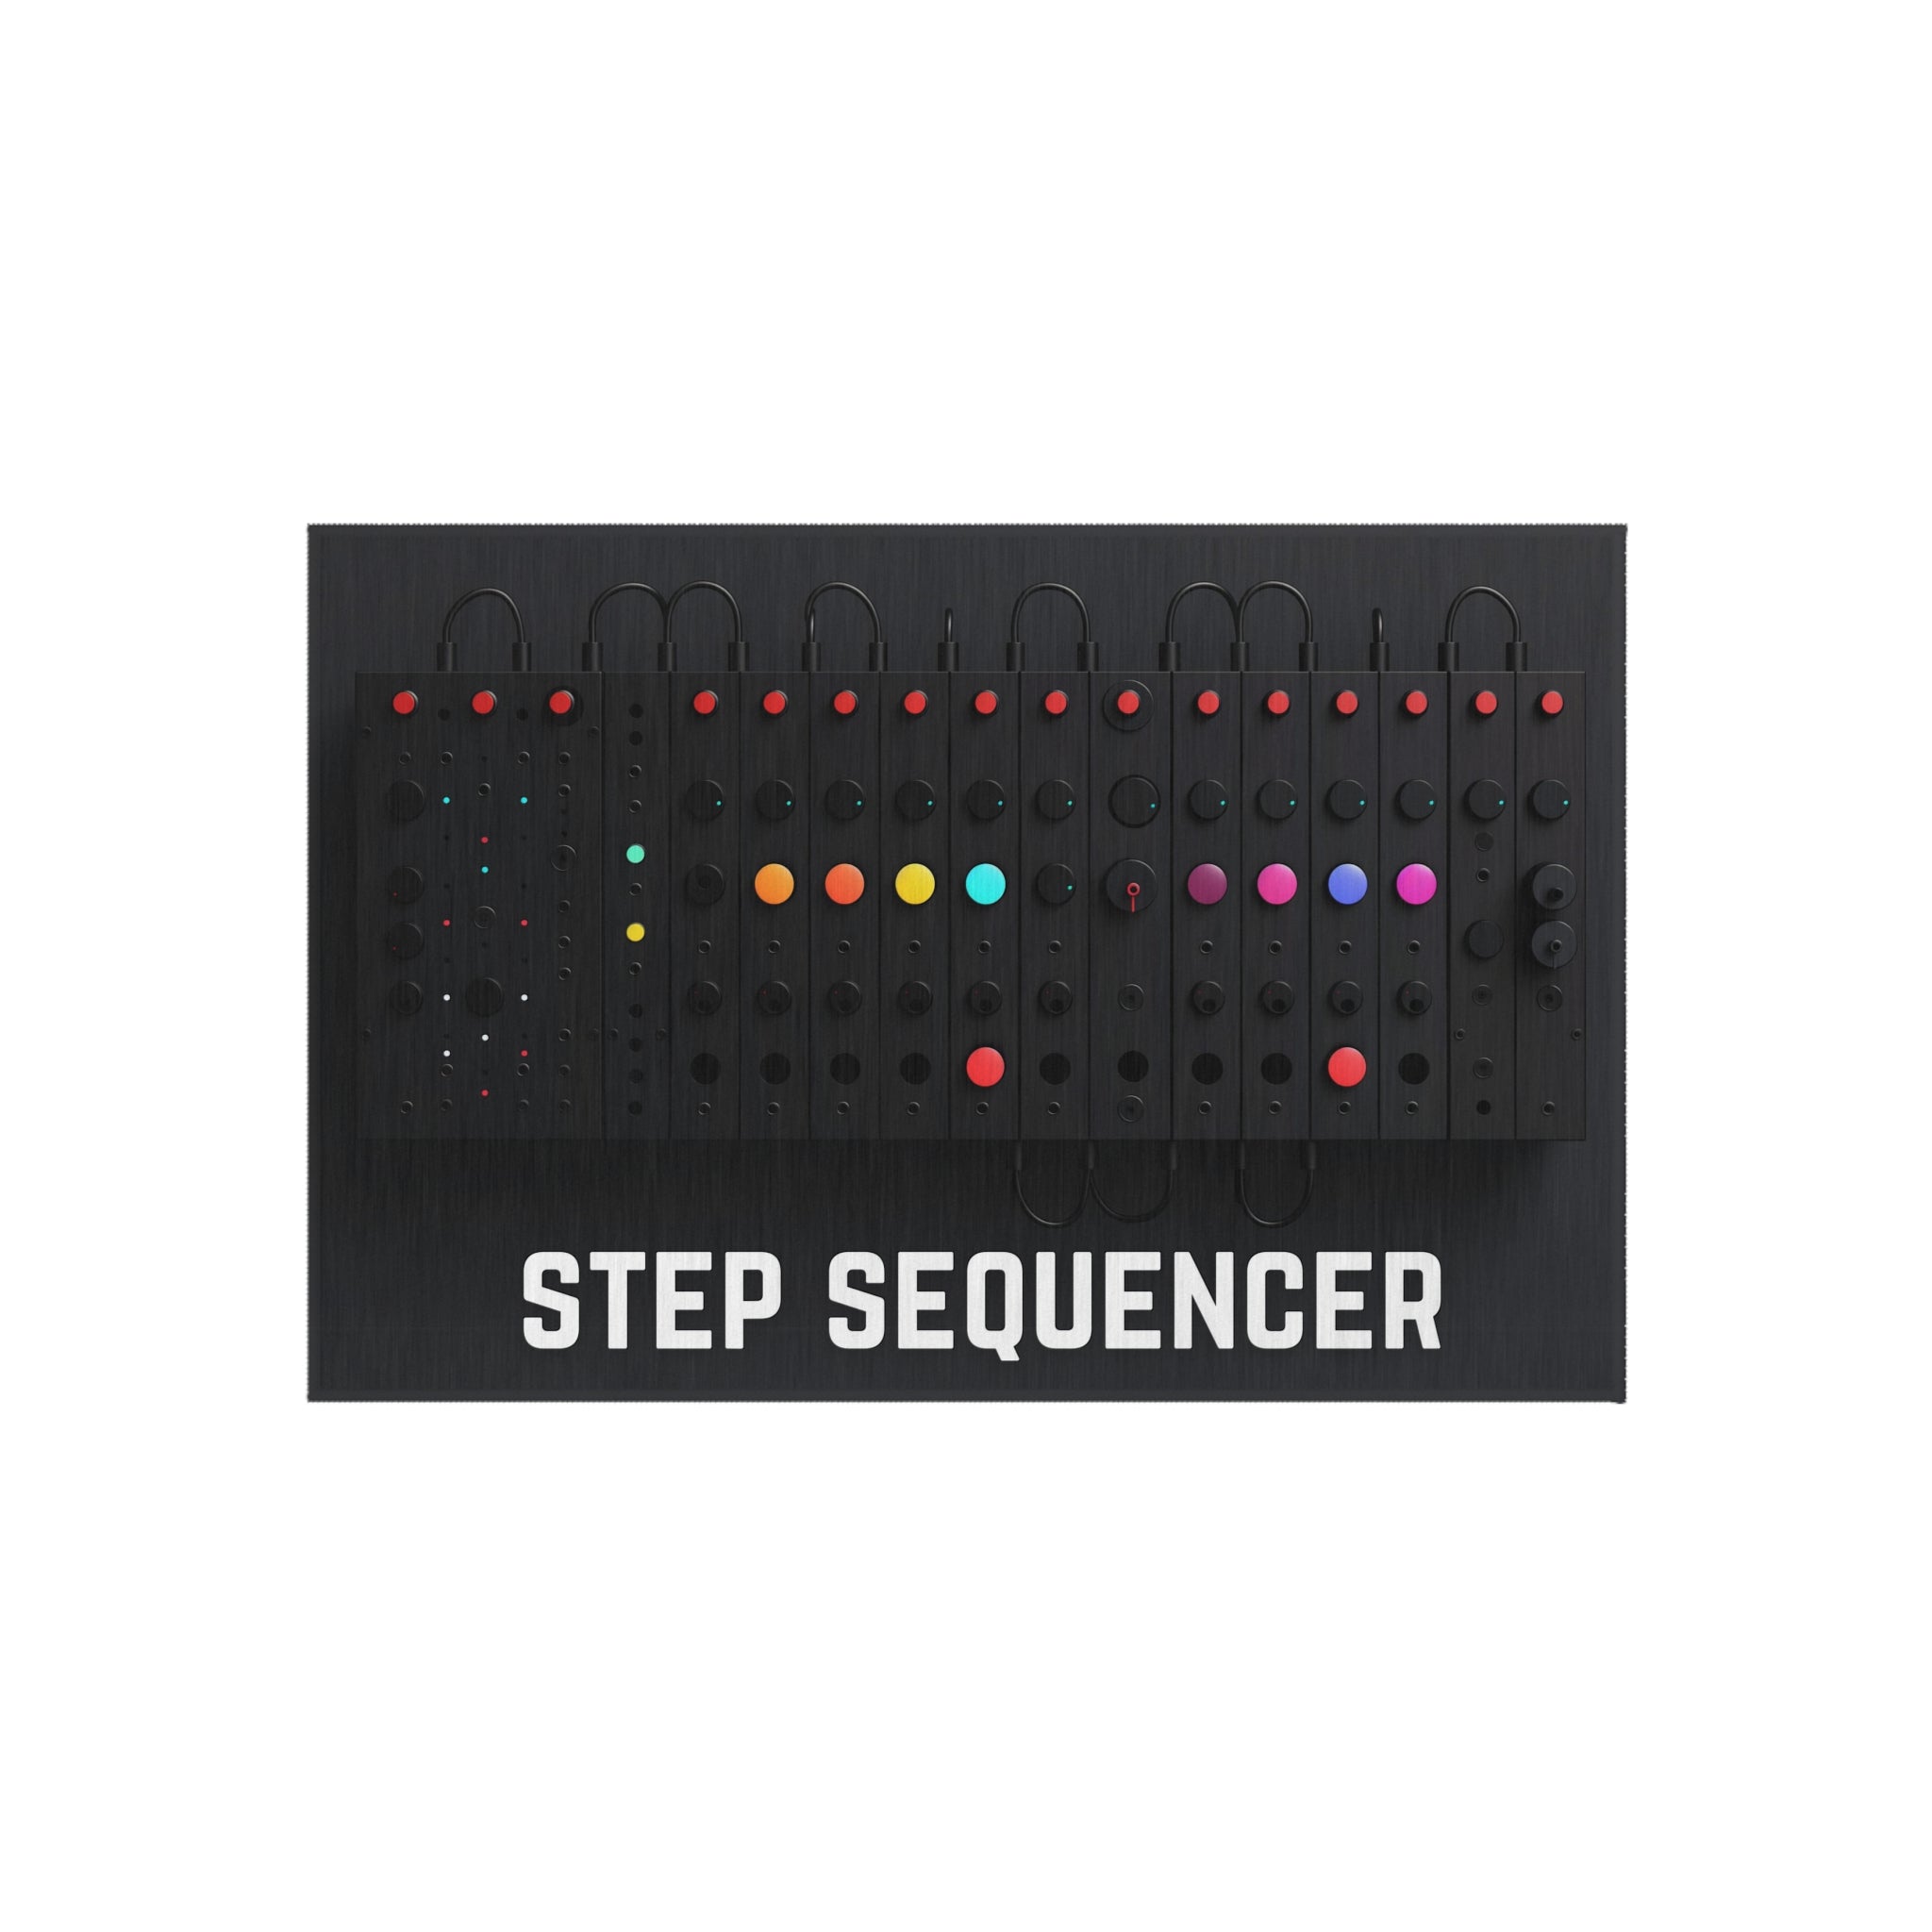 A floor mat with a detailed graphic print resembling a step sequencer, a piece of music equipment used for programming sequences of sounds. It has rows of buttons in various colors like red, orange, cyan, and pink on a black background, mimicking the look of a real device. Above the rows of colored buttons, small red LED-like lights are depicted. Below the graphic, the words 'STEP SEQUENCER' are boldly printed in white capital letters, emphasizing the music production theme of the mat.